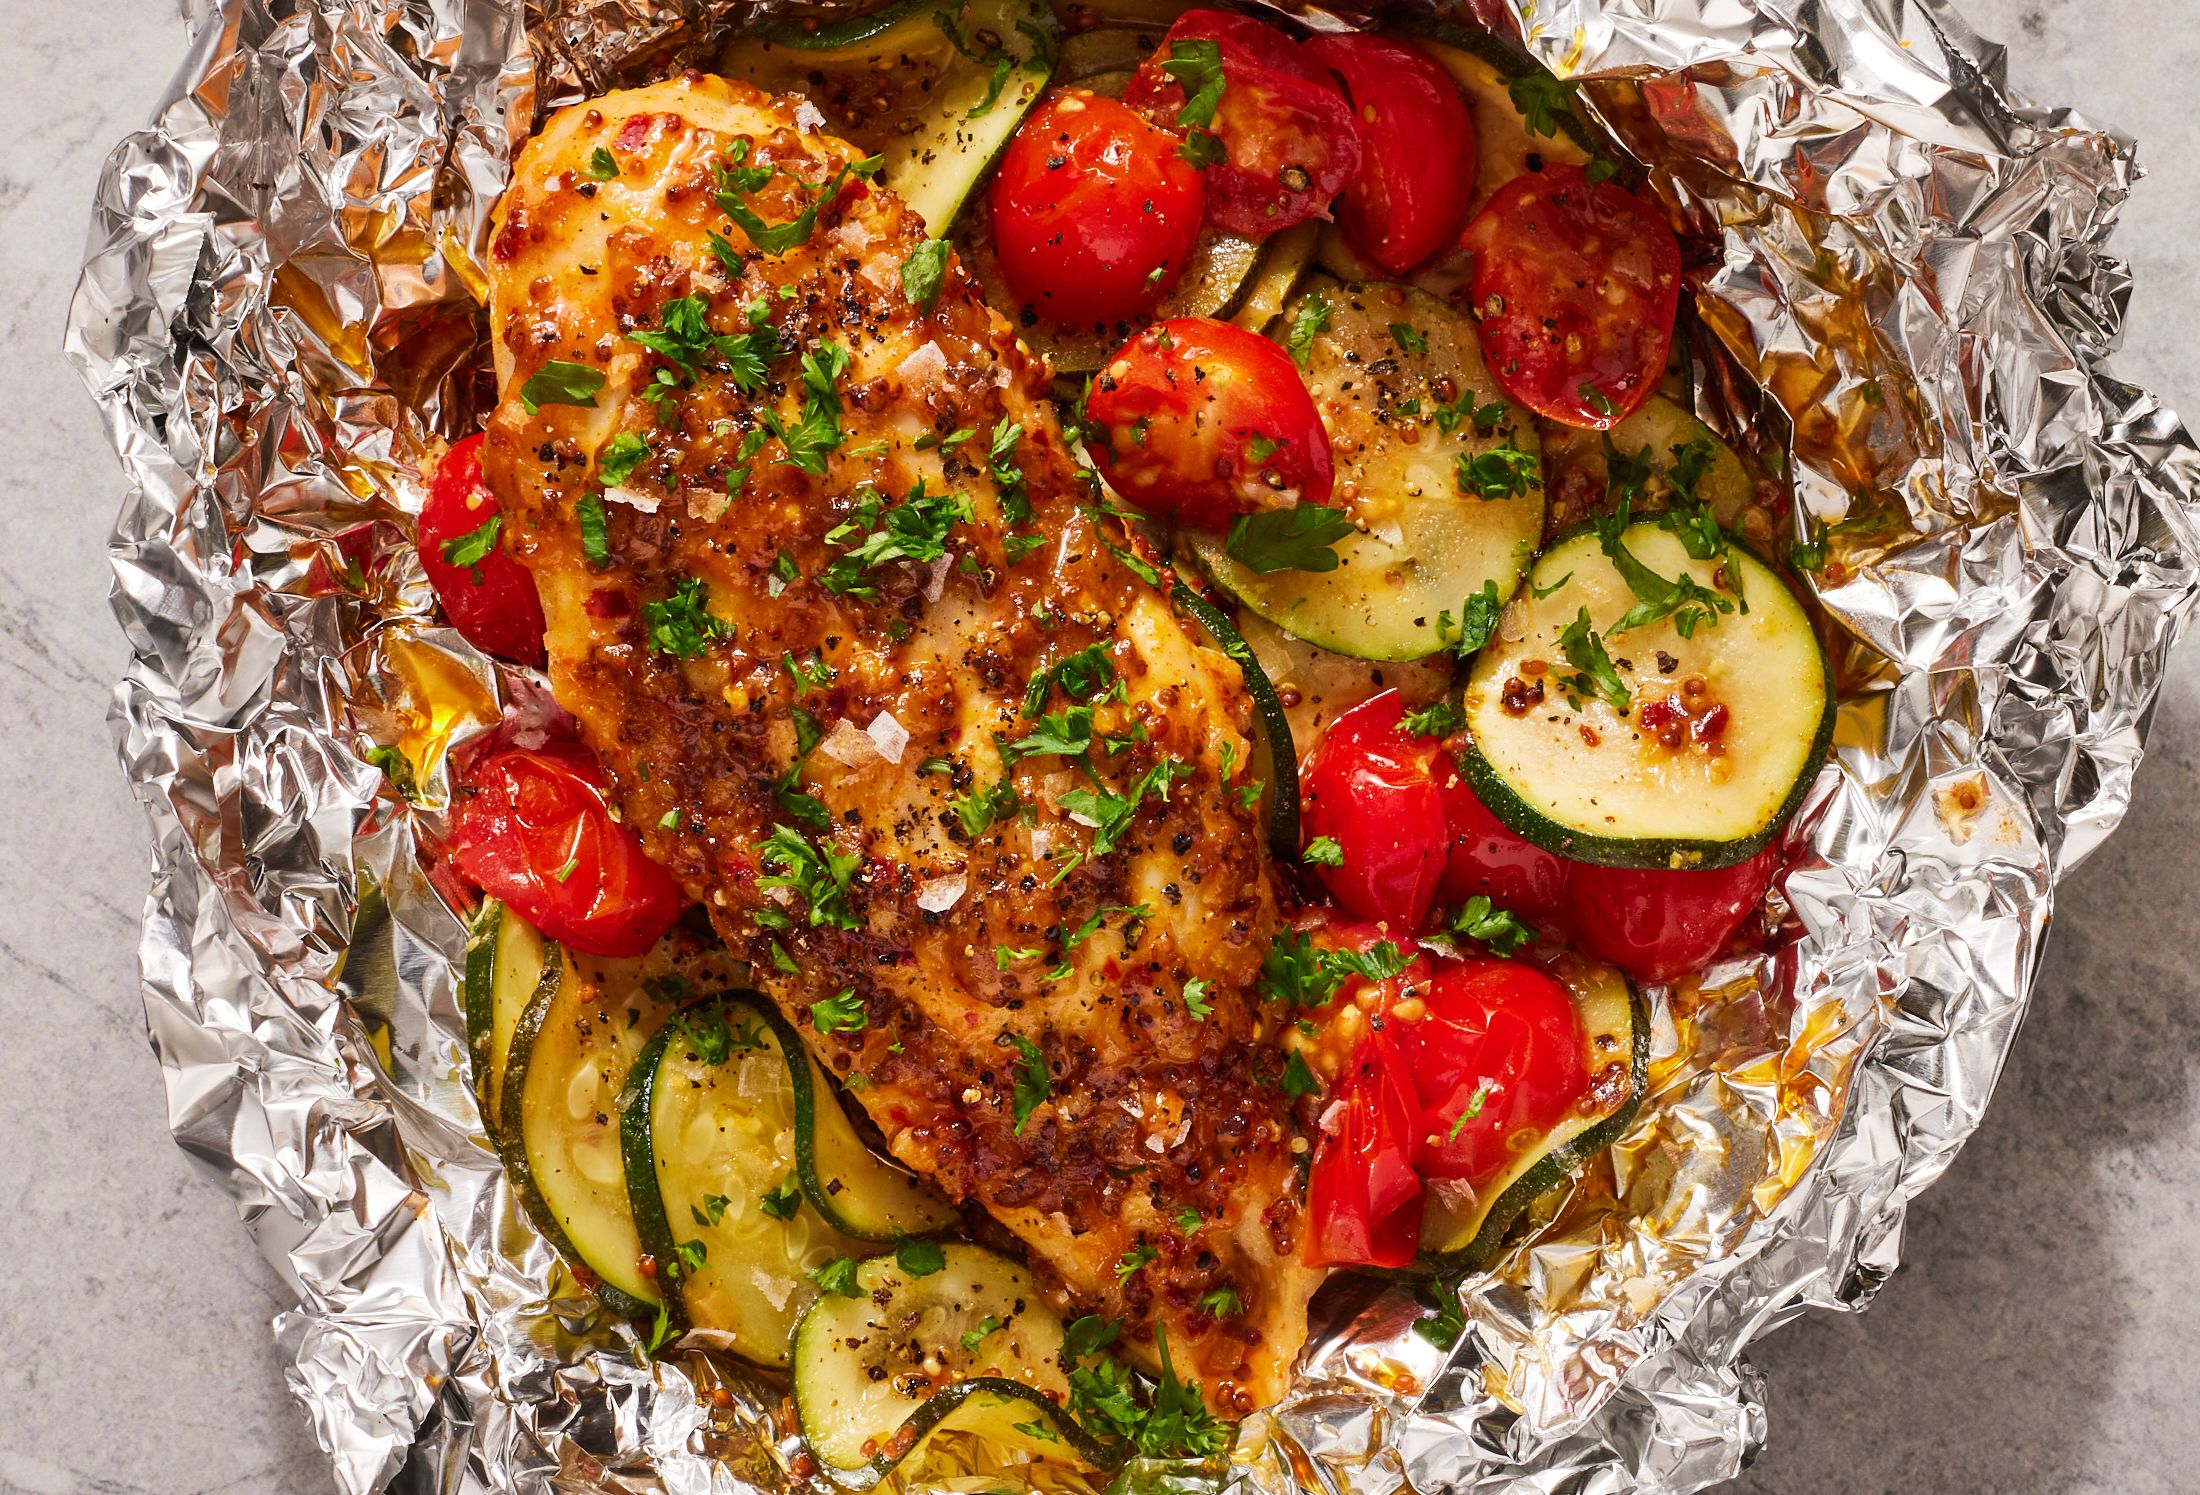 Best Ways to Cook Foil Packs 